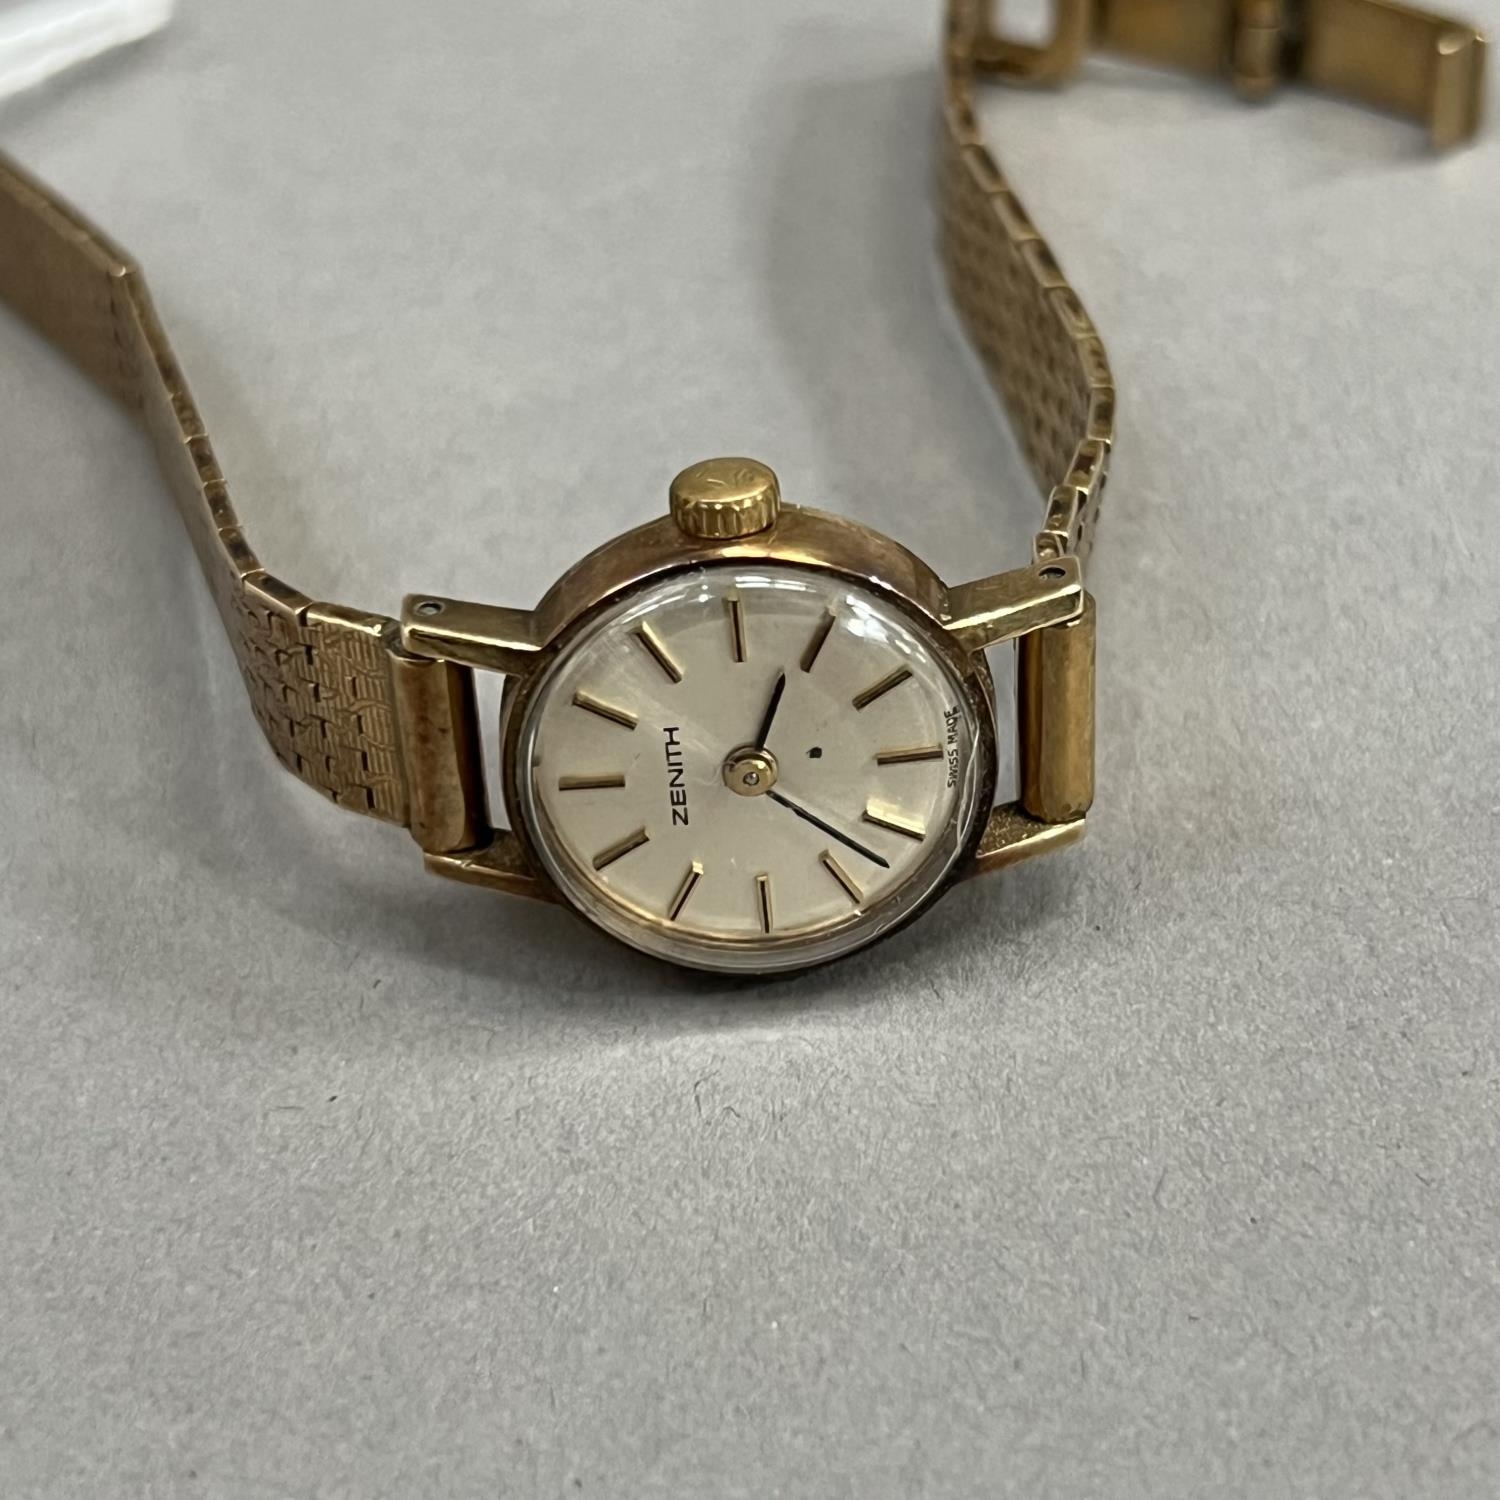 A Zenith lady’s manual wrist watch, c1978, in 9ct gold case no. 37635 1779/1, signed, 17 jewelled - Image 2 of 2